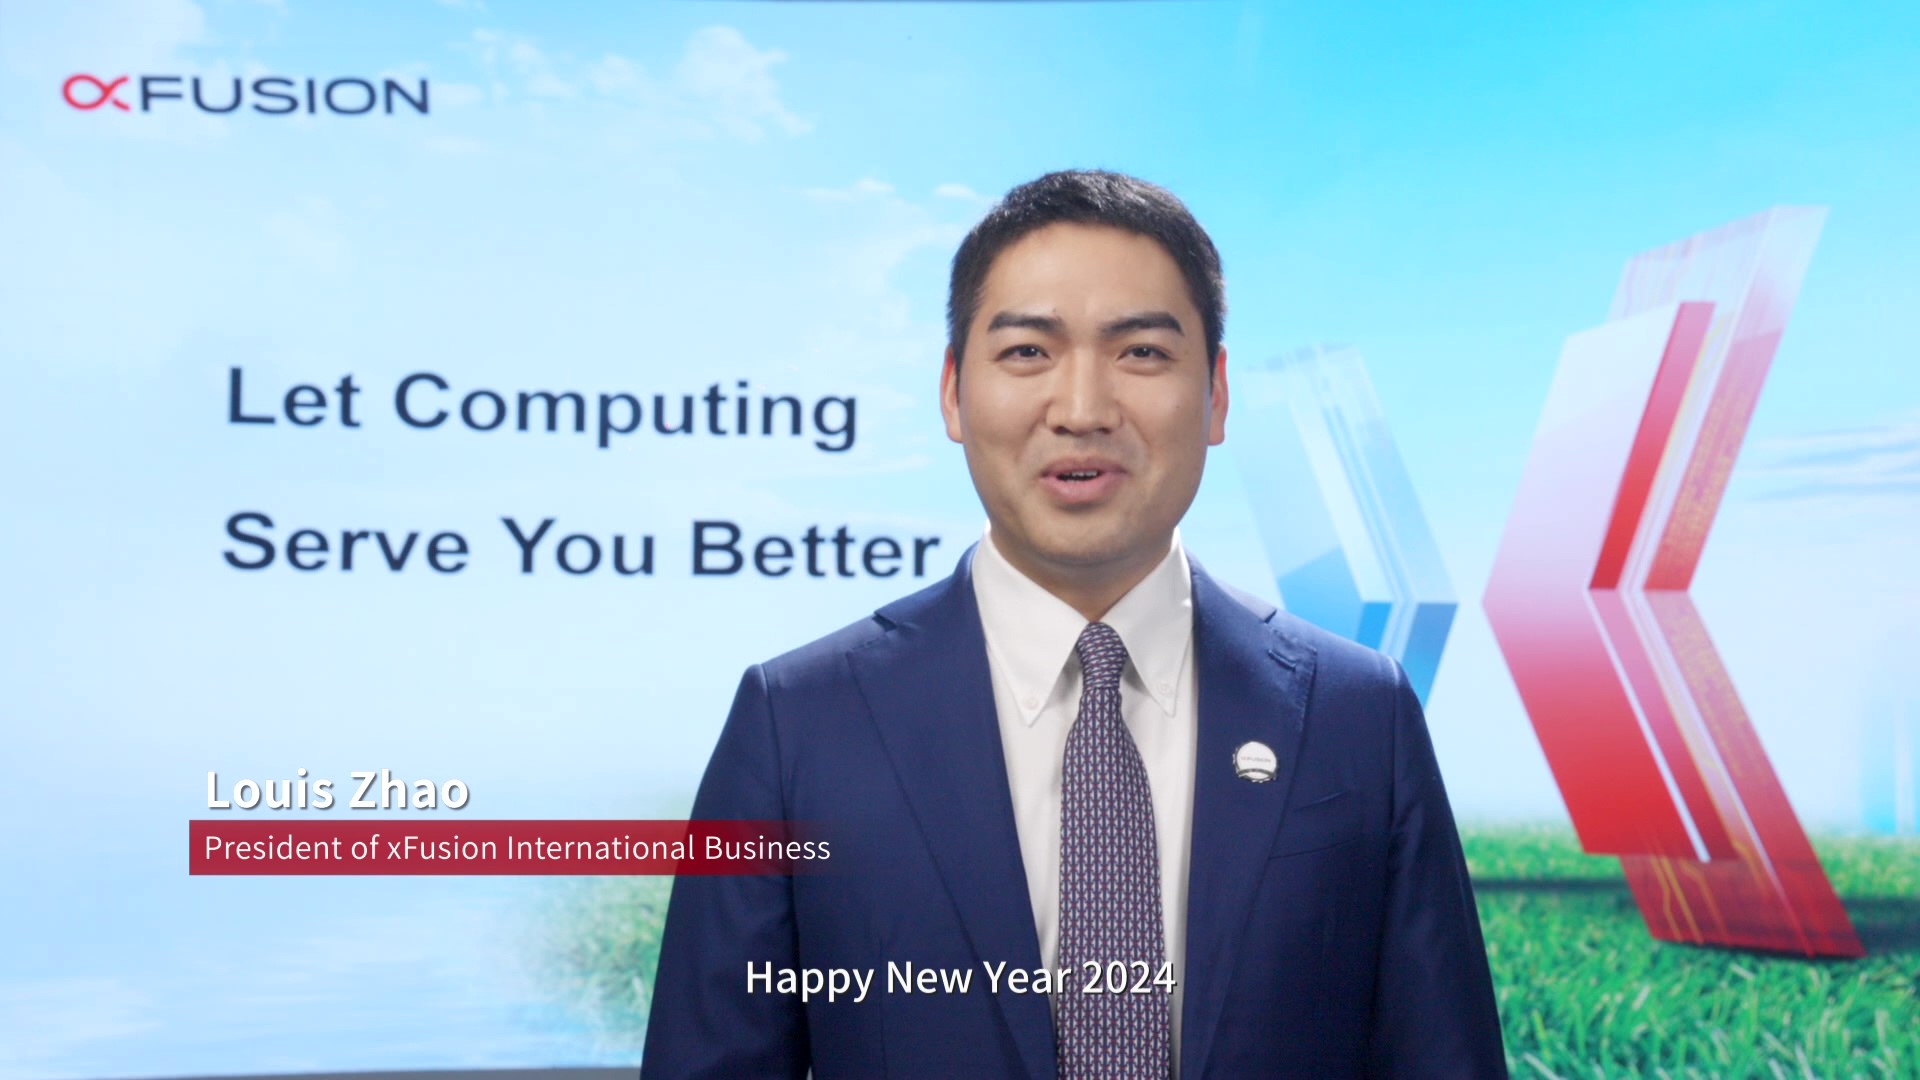 Chinese New Year Greetings 2024